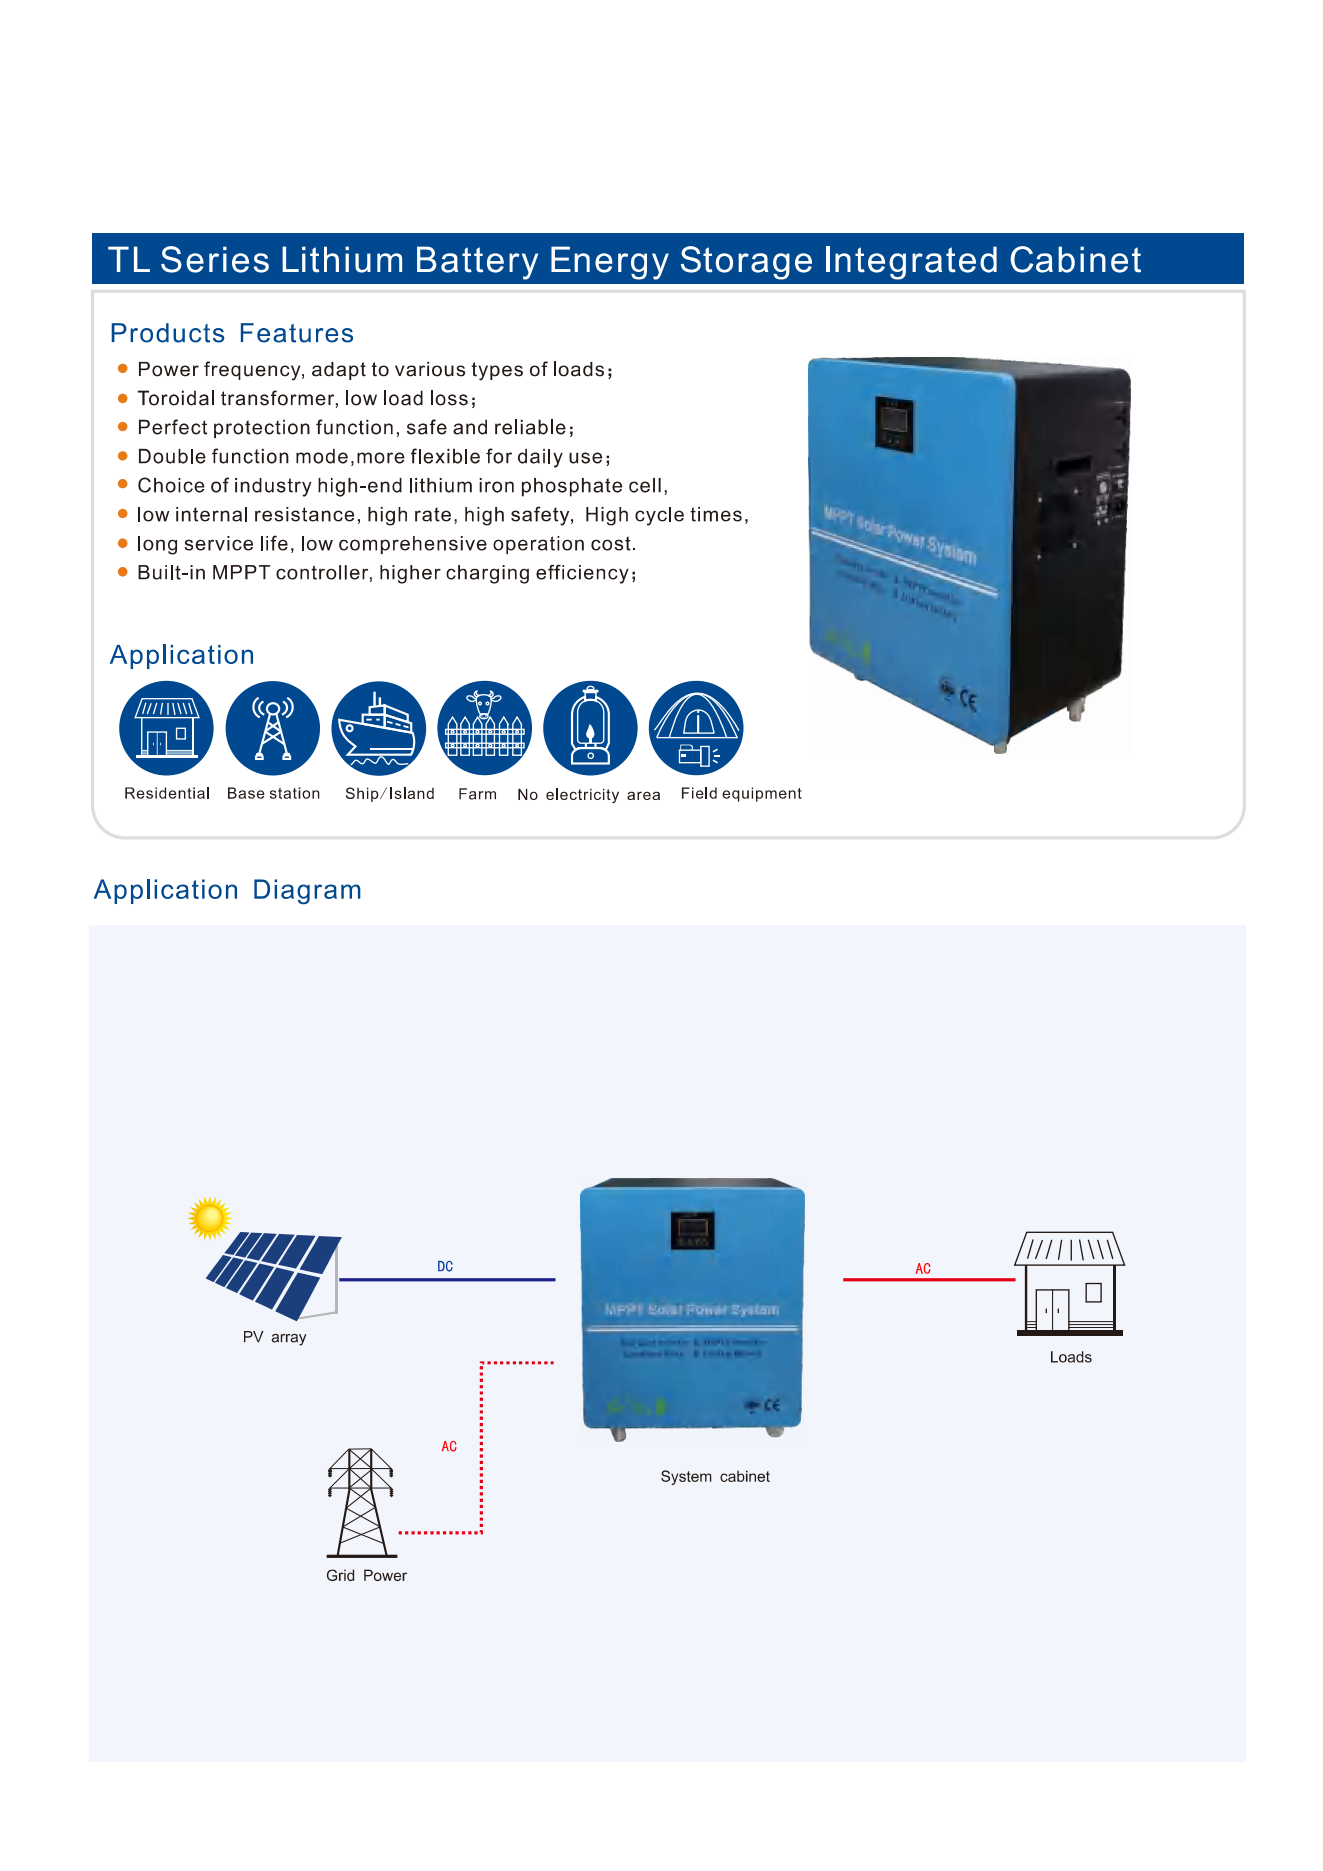 TL Series Lithium Battery Energy Storage Integrated Cabinet